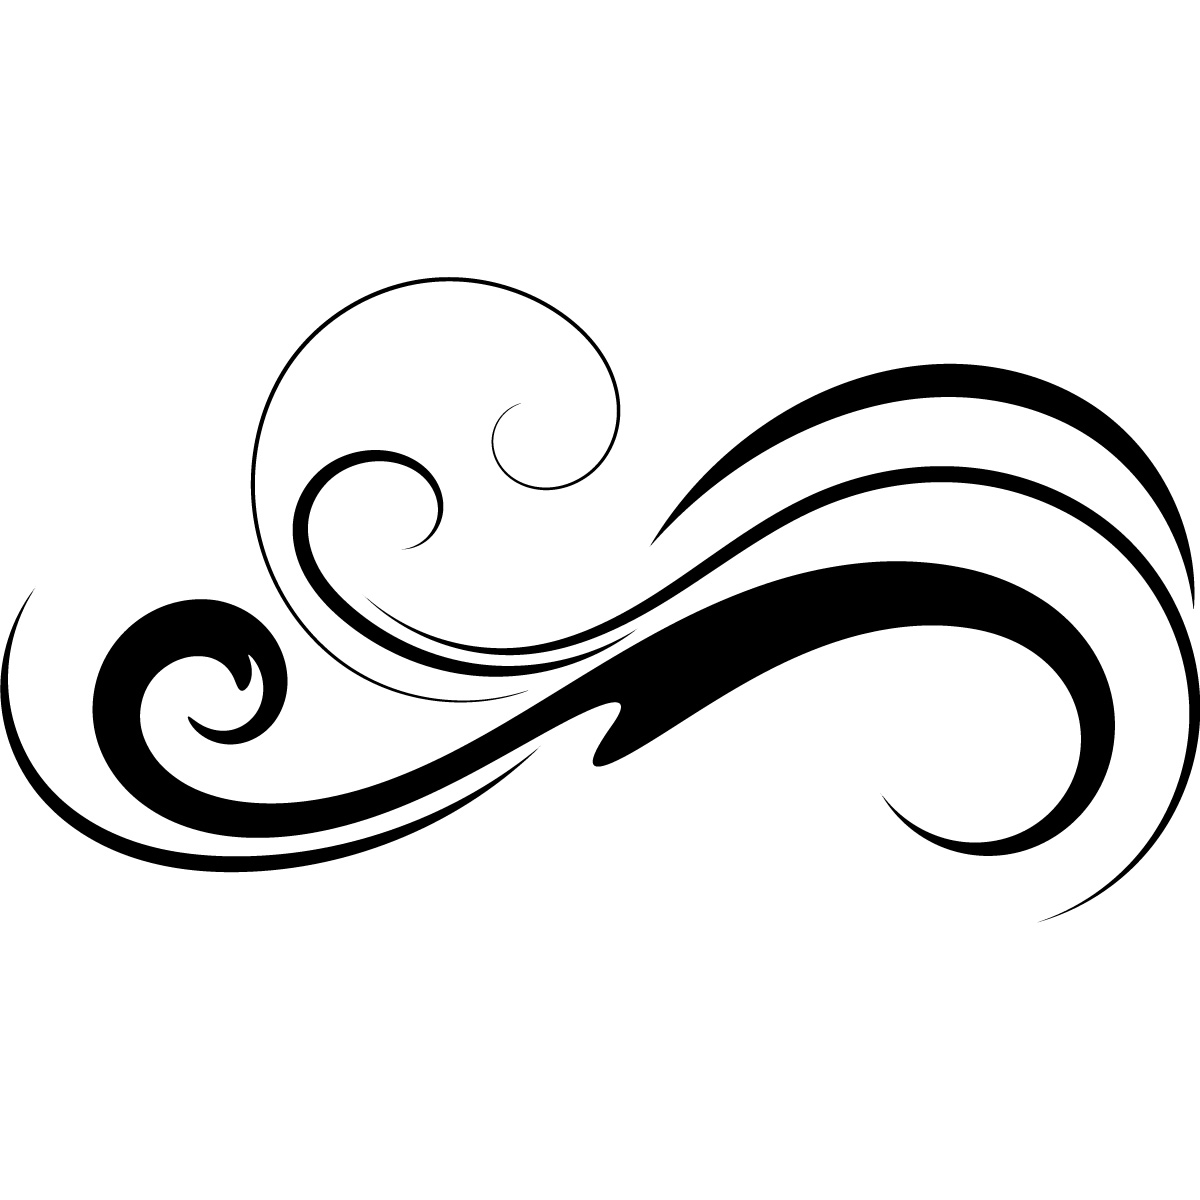 Free wave cliparts download. Waves clipart black and white